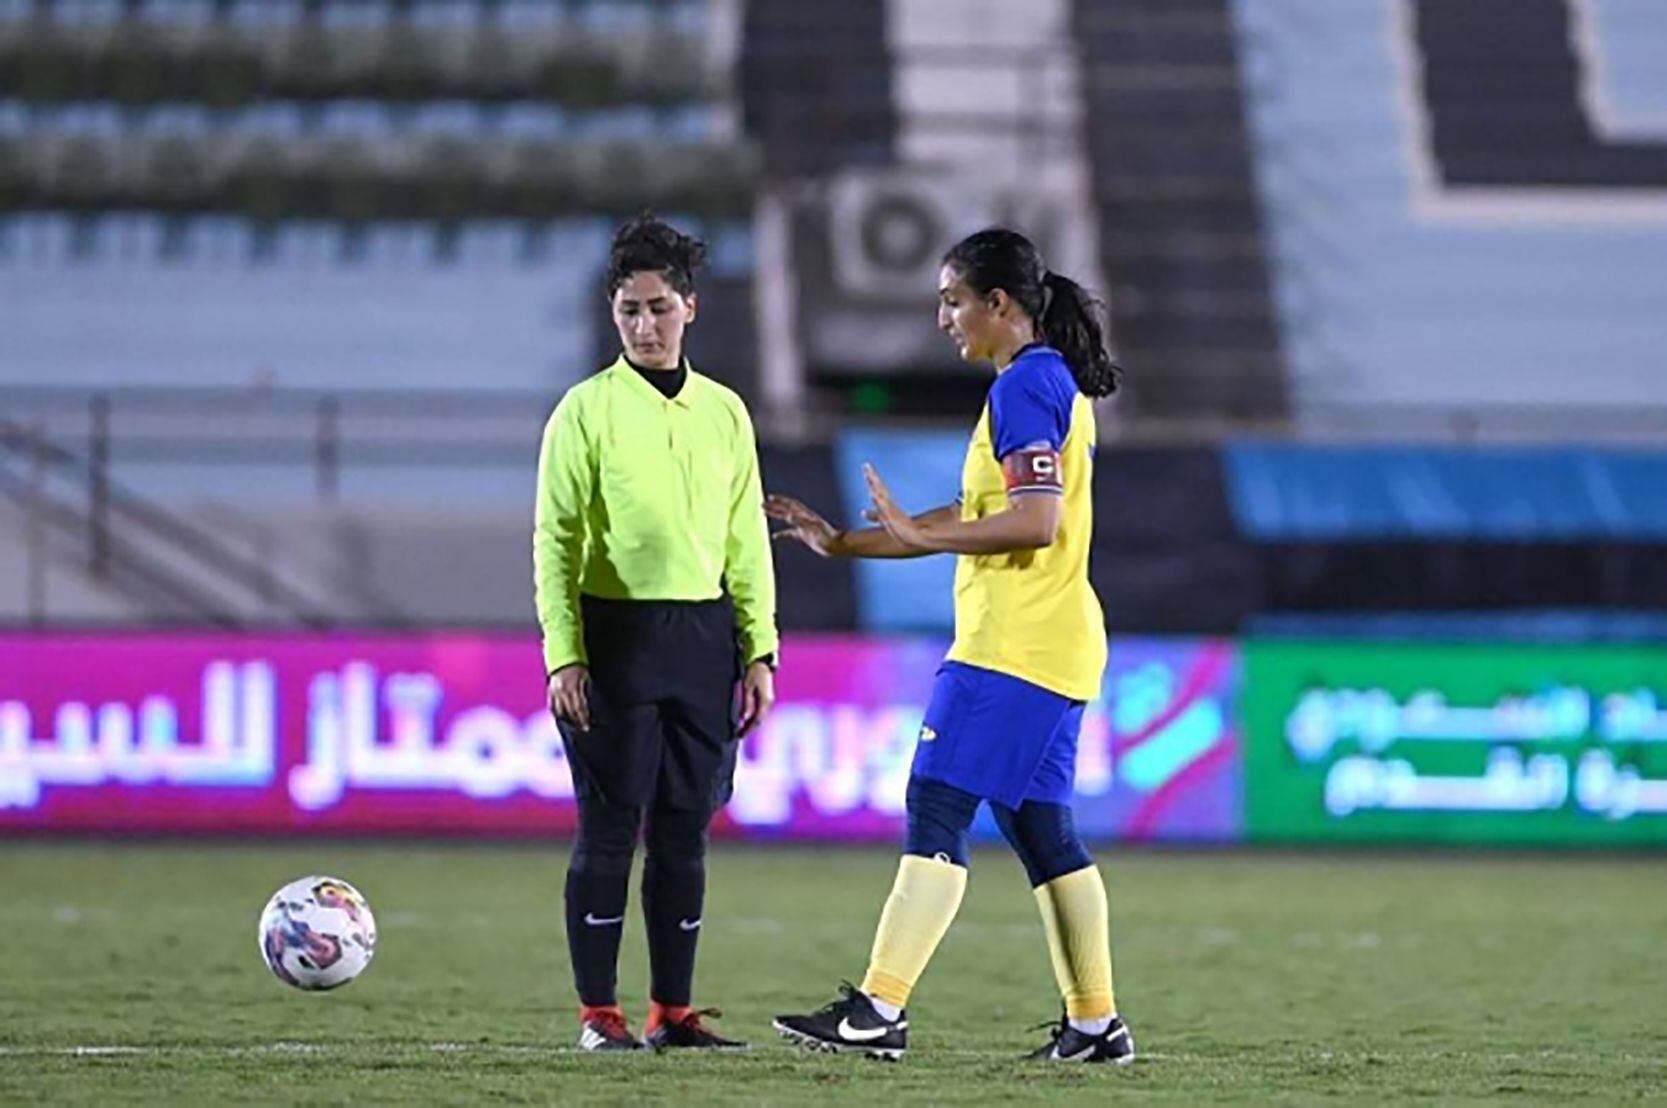 Arabic women's football: supported by the regime, but still